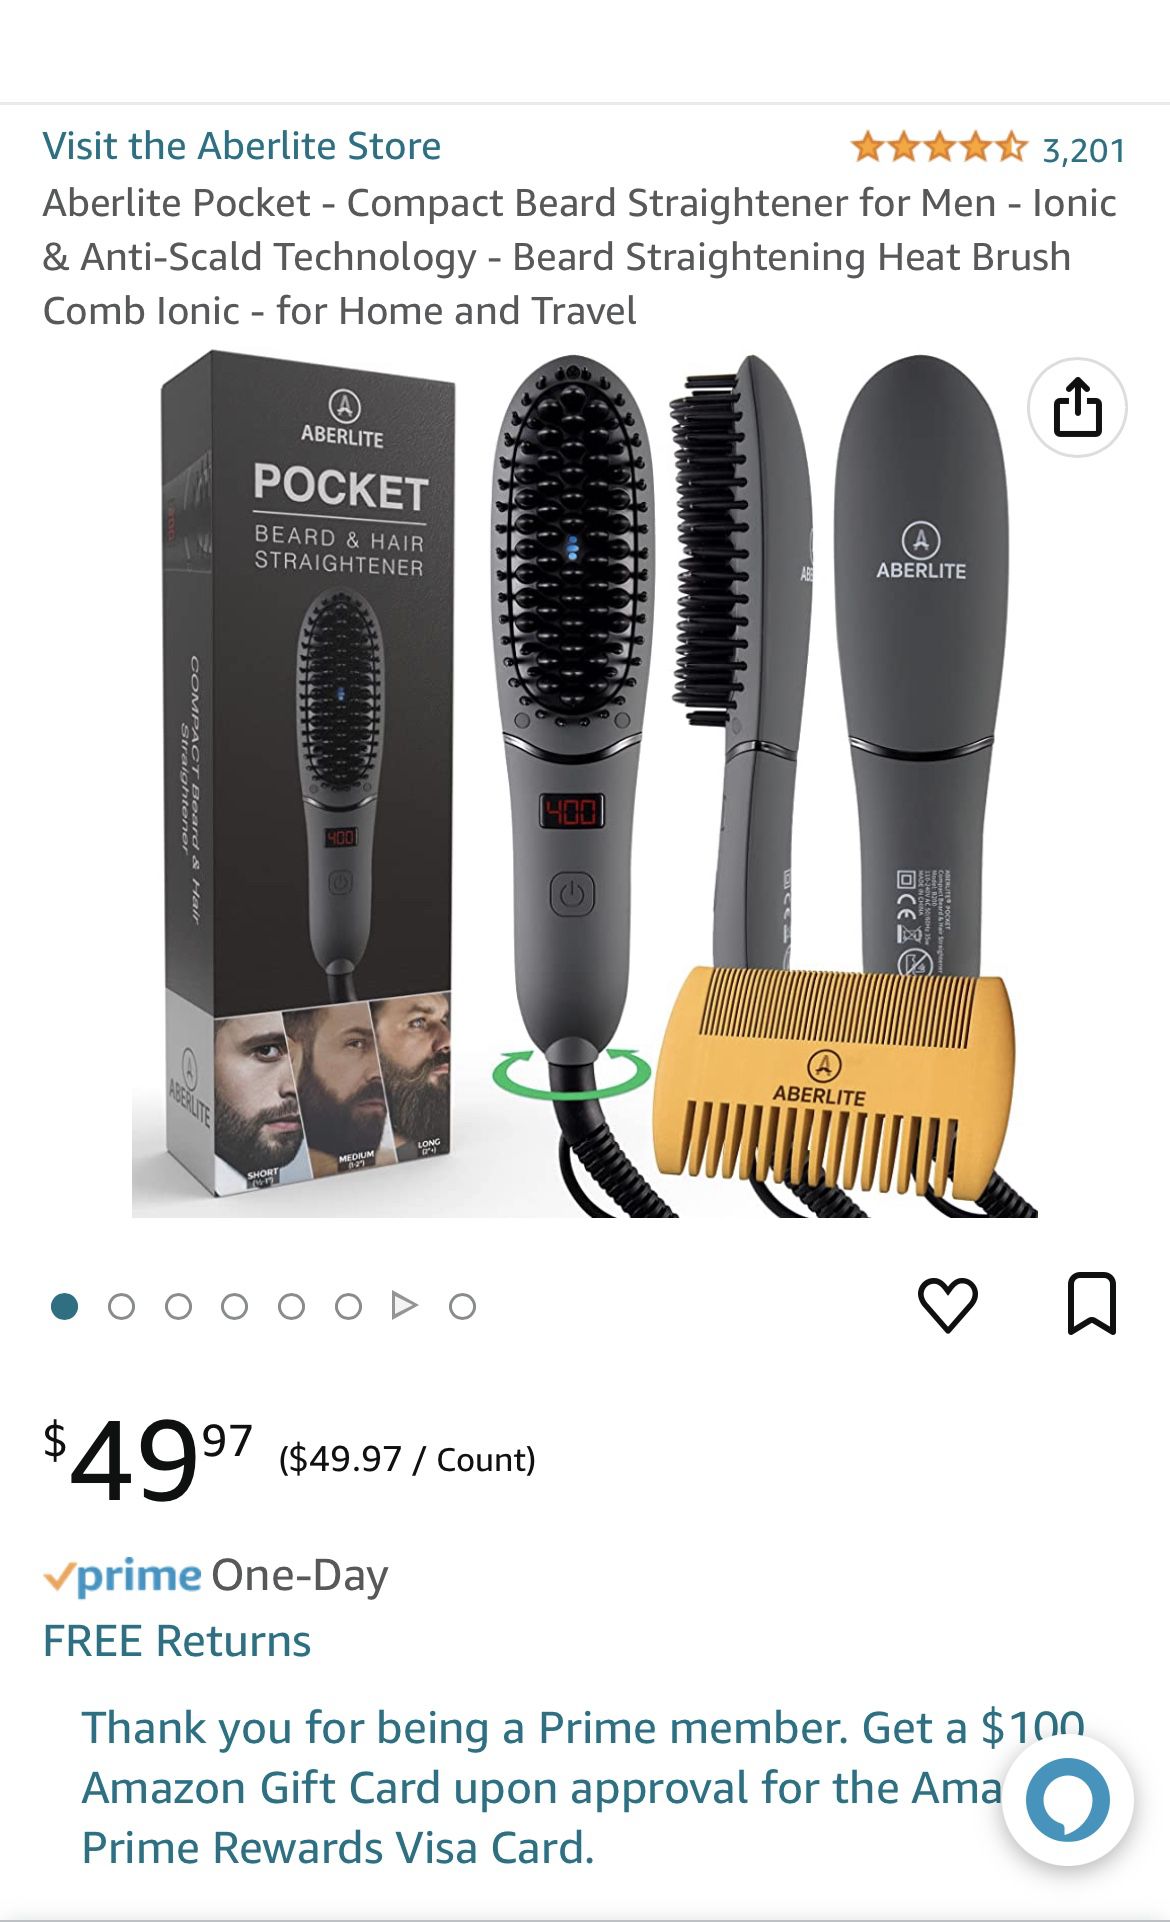  Aberlite Pocket - Compact Beard Straightener for Men - Ionic & Anti-Scald Technology - Beard Straightening Heat Brush Comb Ionic - for Home and Trave